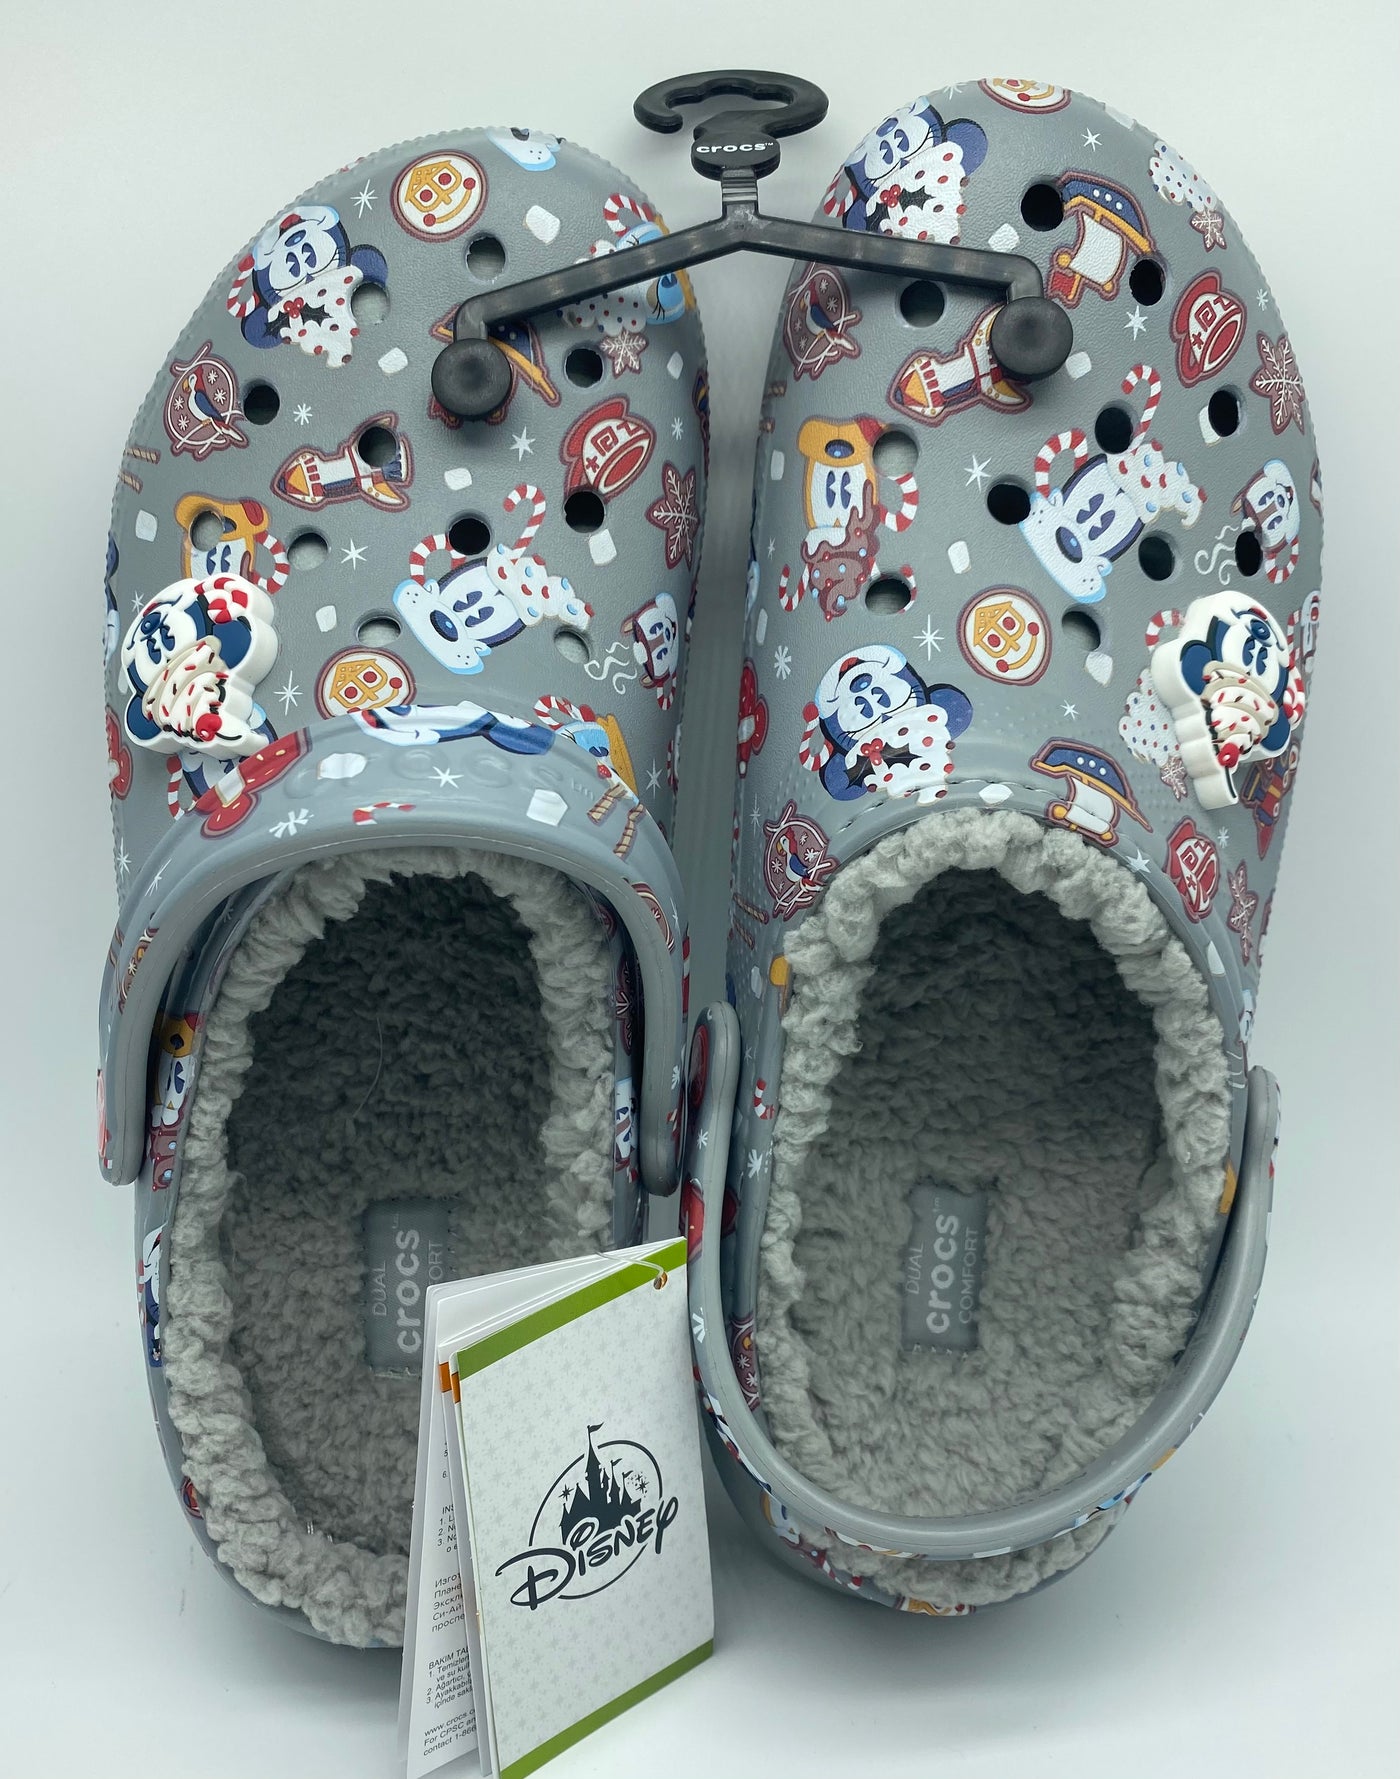 Disney Parks Holiday Treats 2021 Clogs Adults by Crocs M9/W11 Fleece Lined New